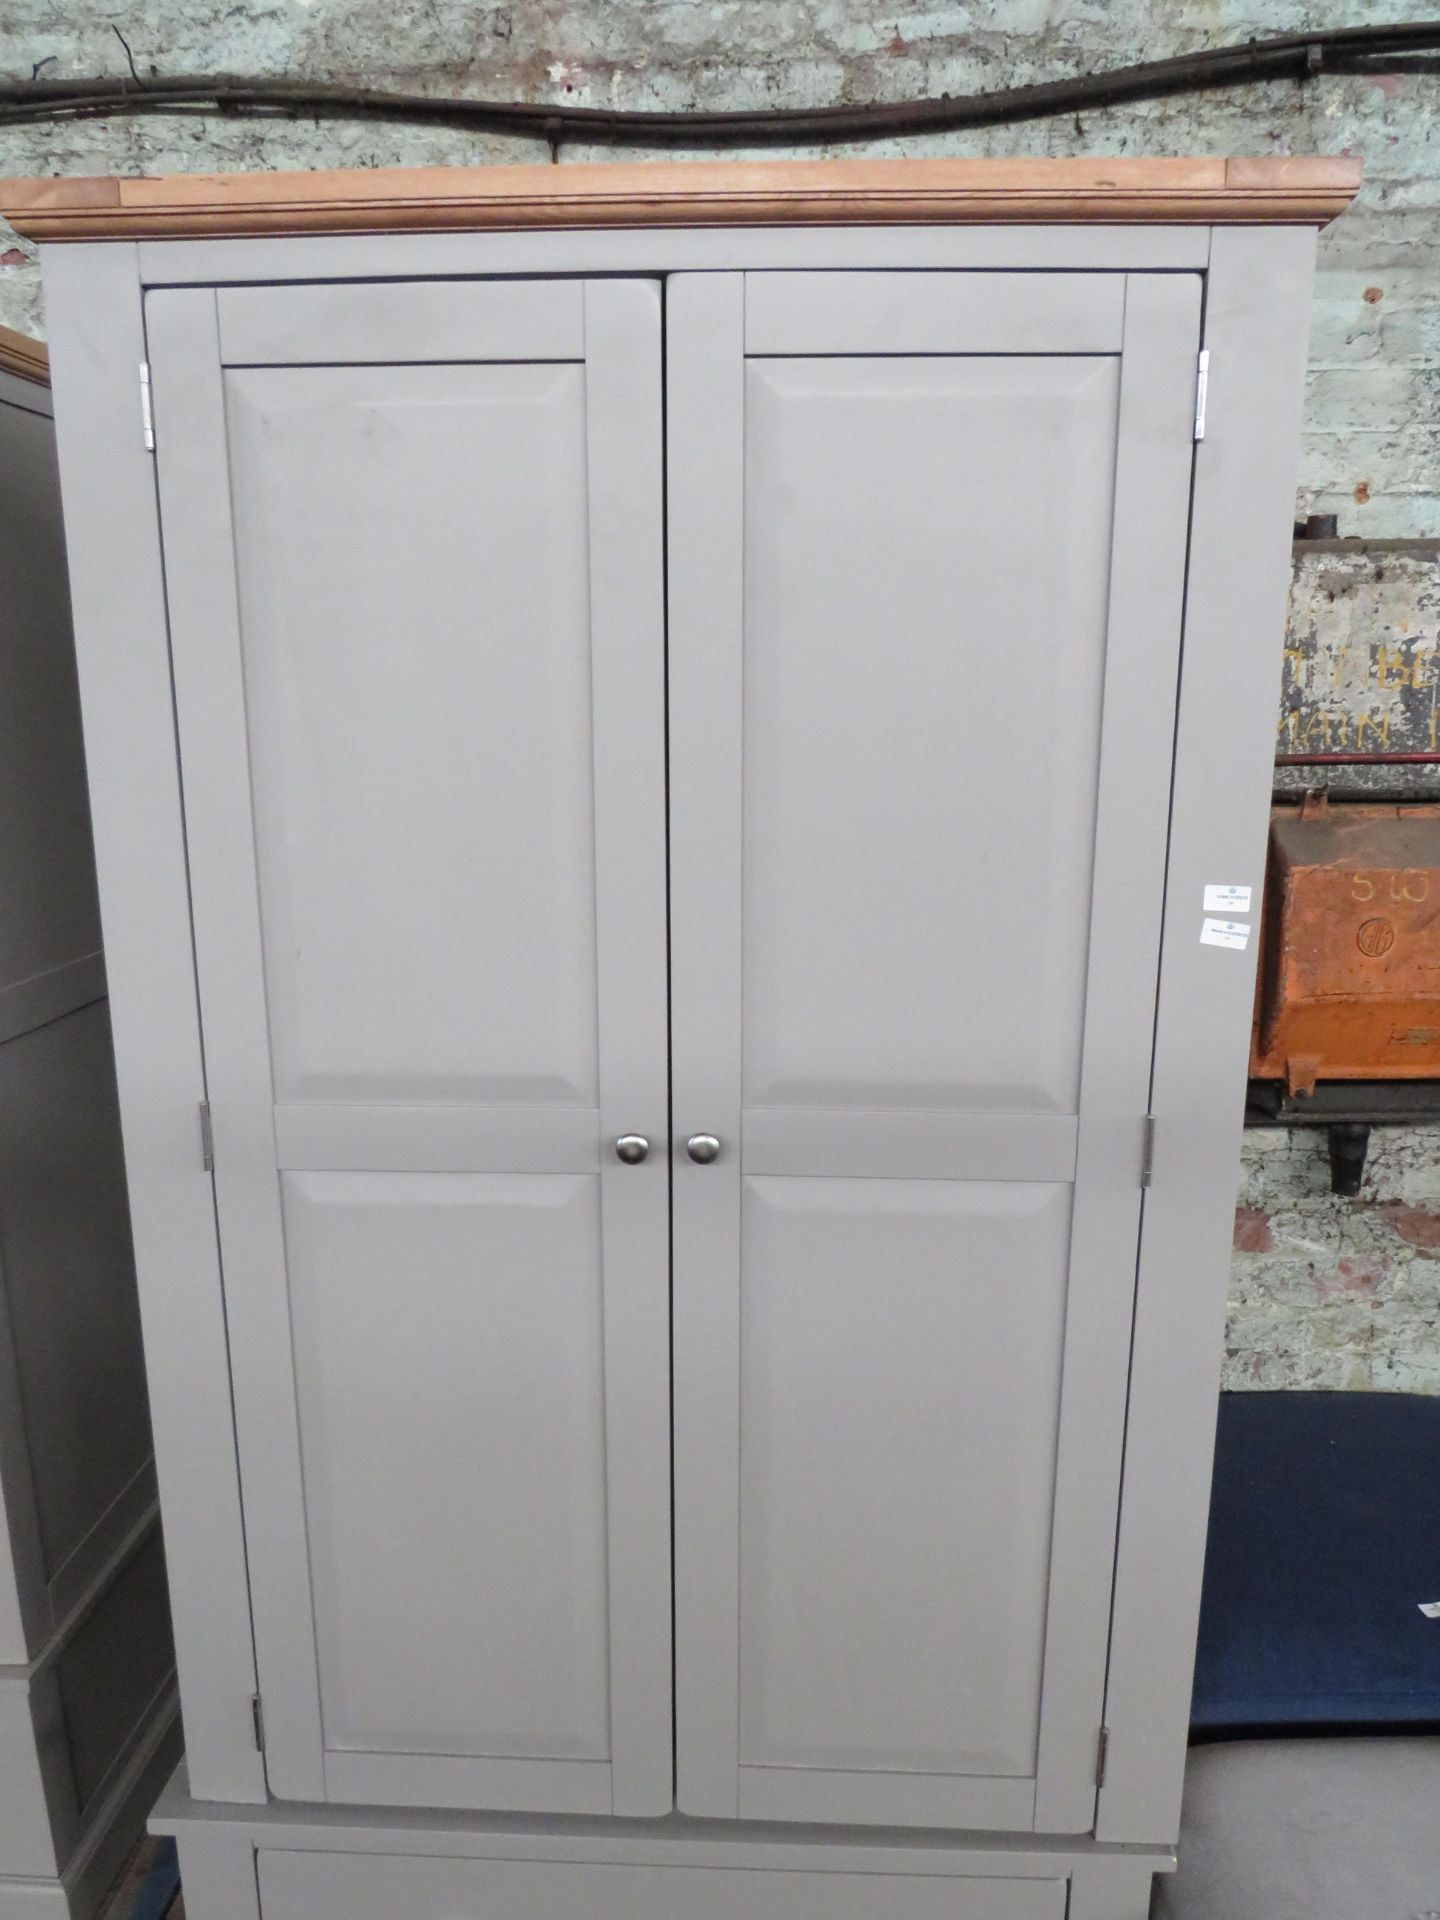 Oak Furnitureland St Ives Natural Oak And Light Grey Painted Double Wardrobe RRP 799.99 The St